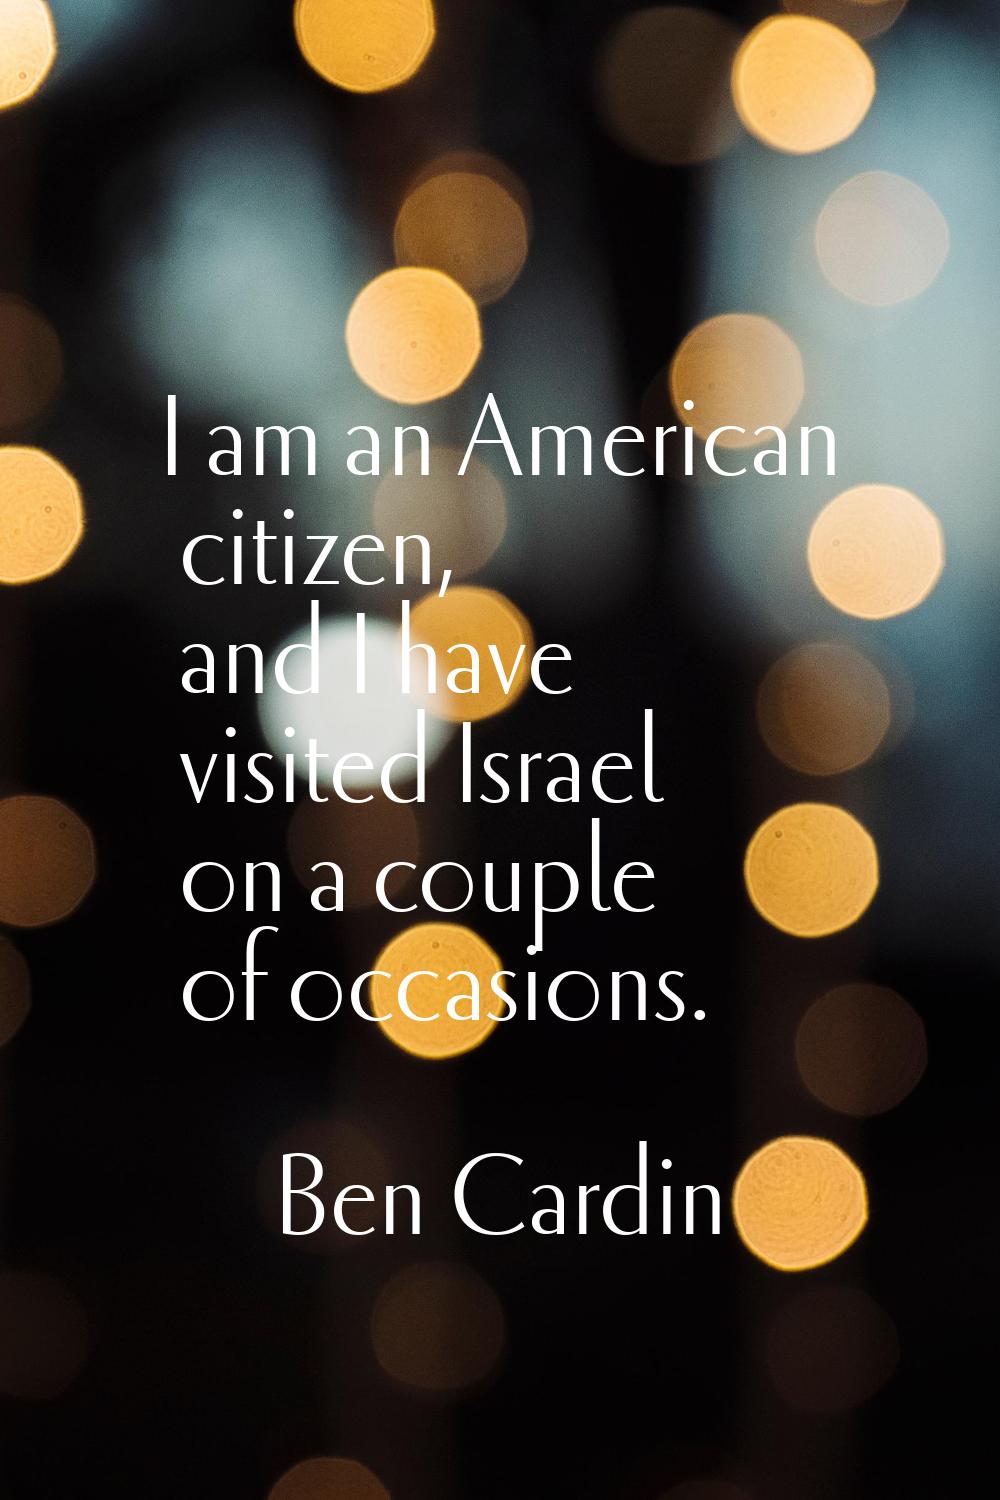 I am an American citizen, and I have visited Israel on a couple of occasions.